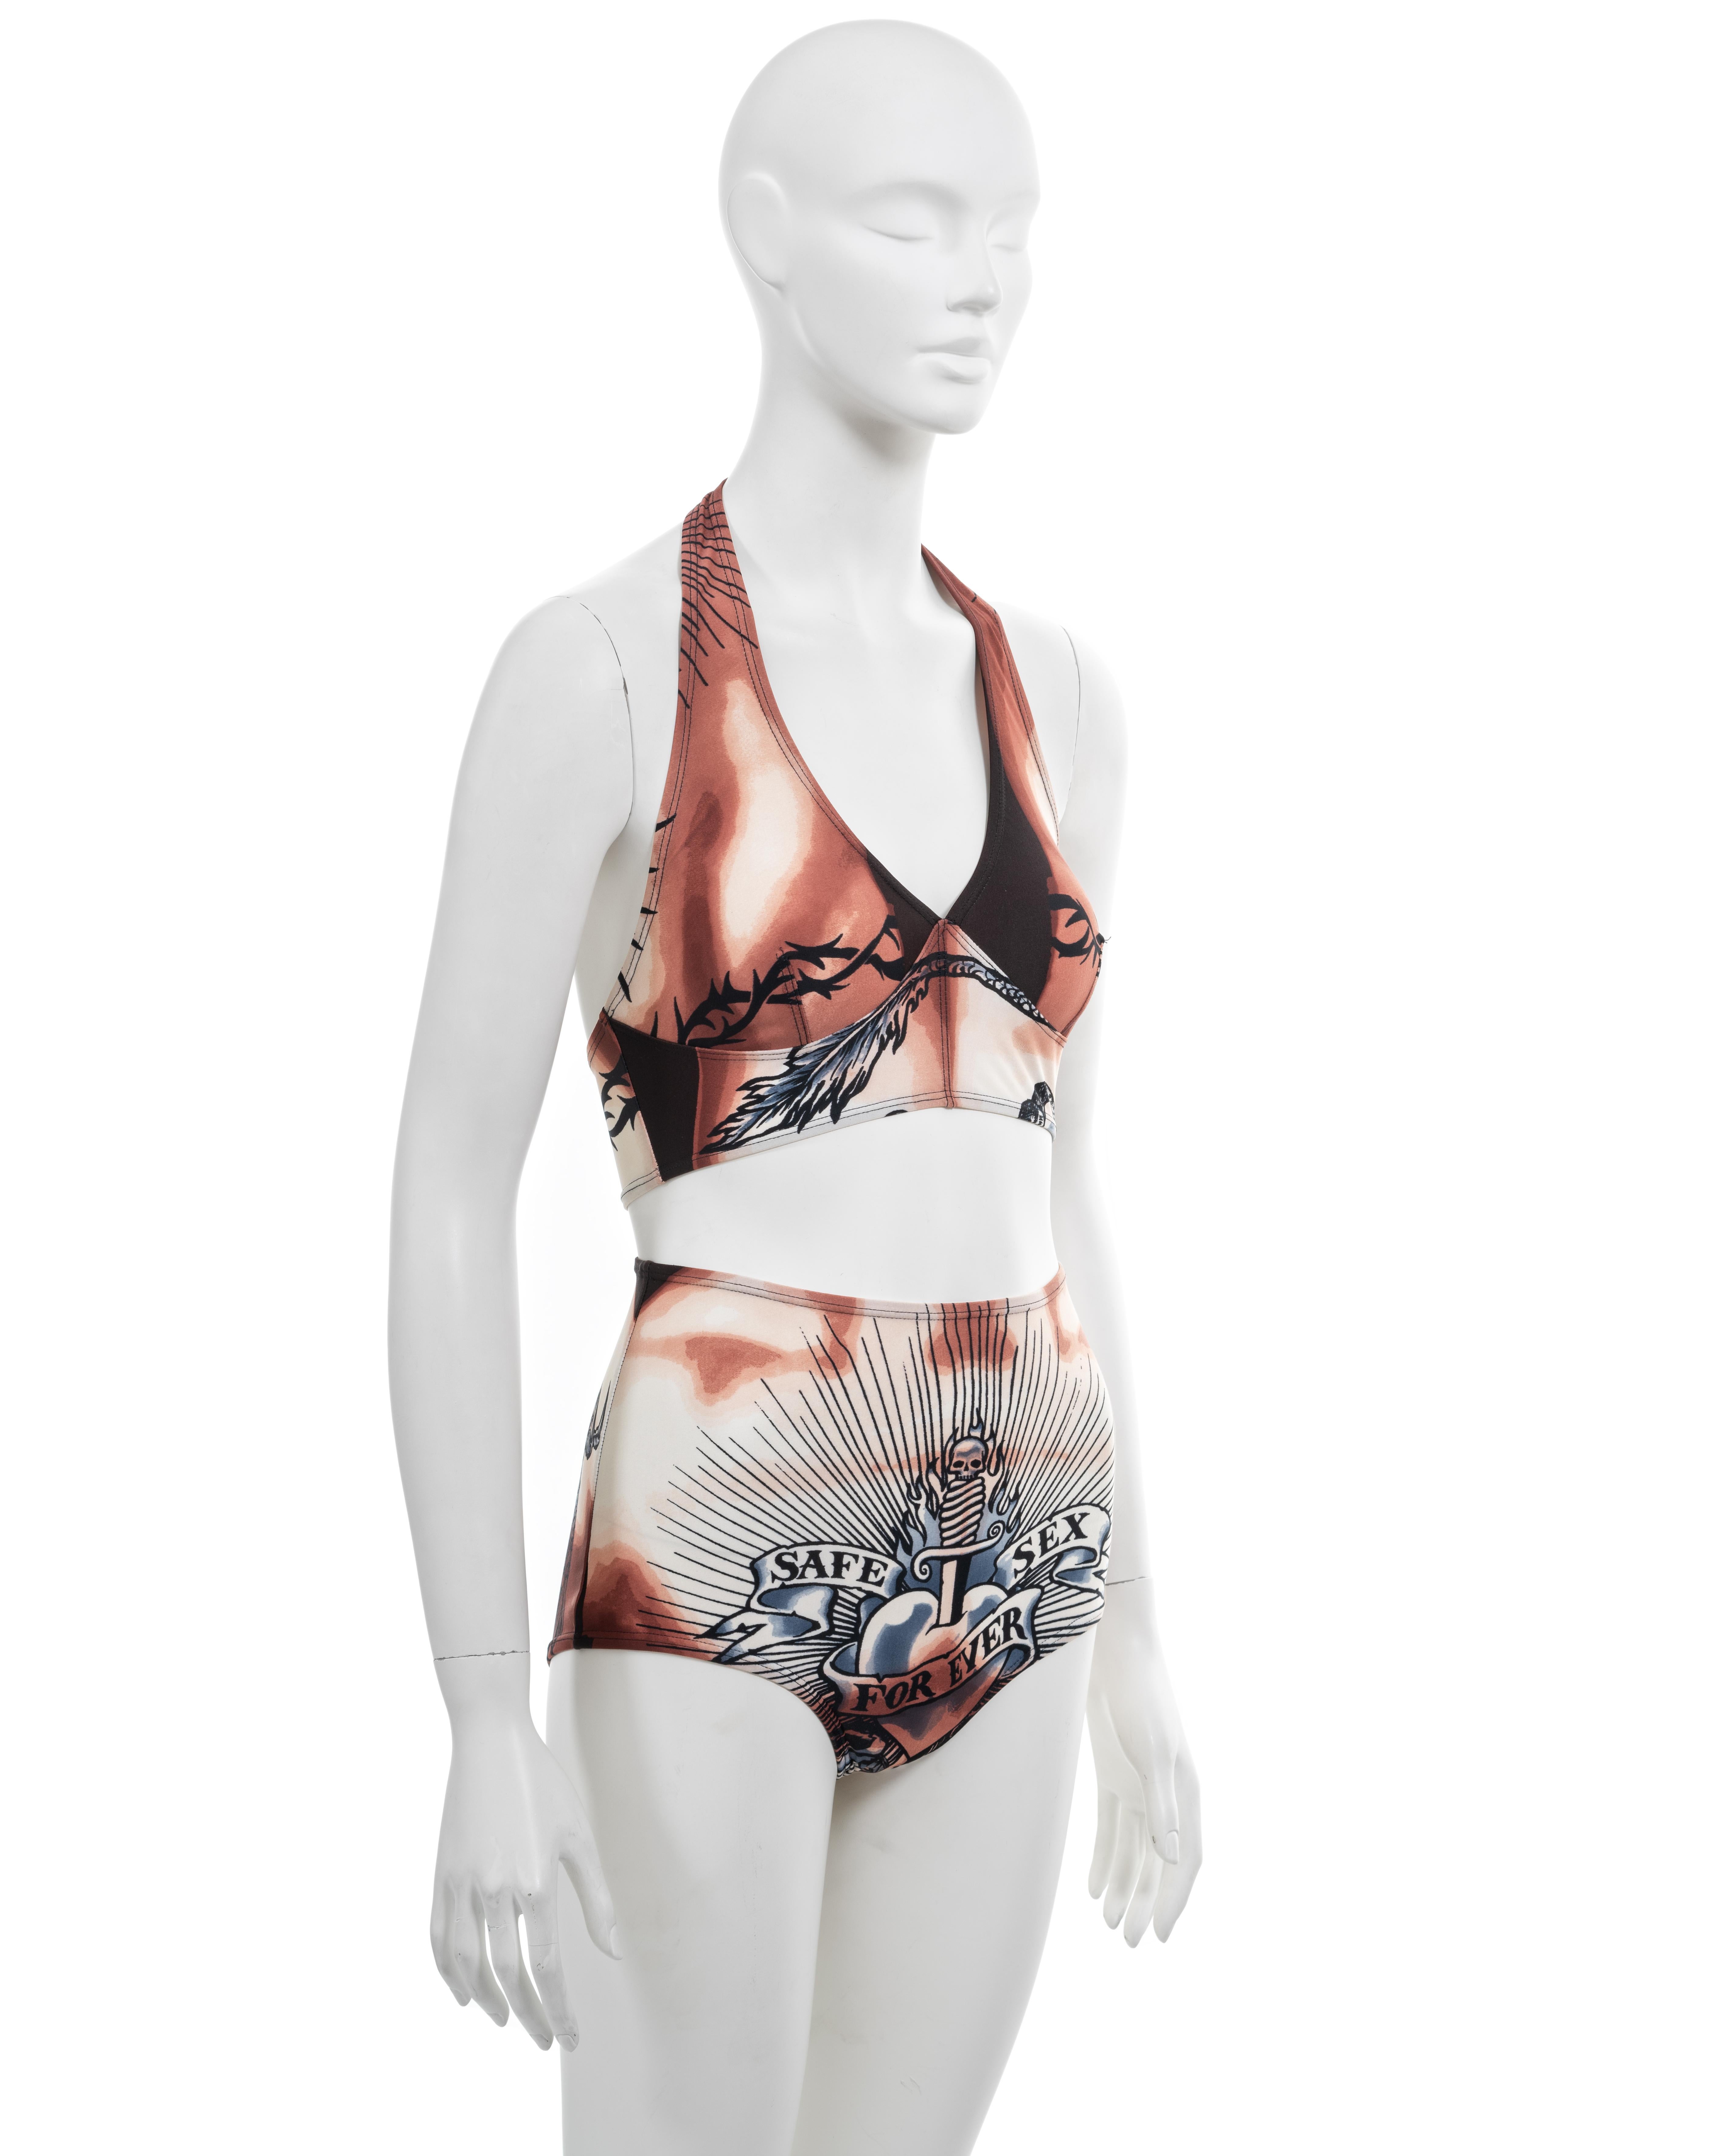 Jean Paul Gaultier 'Safe Sex Forever' tattoo print 2 piece set, ss 1996 For Sale 1